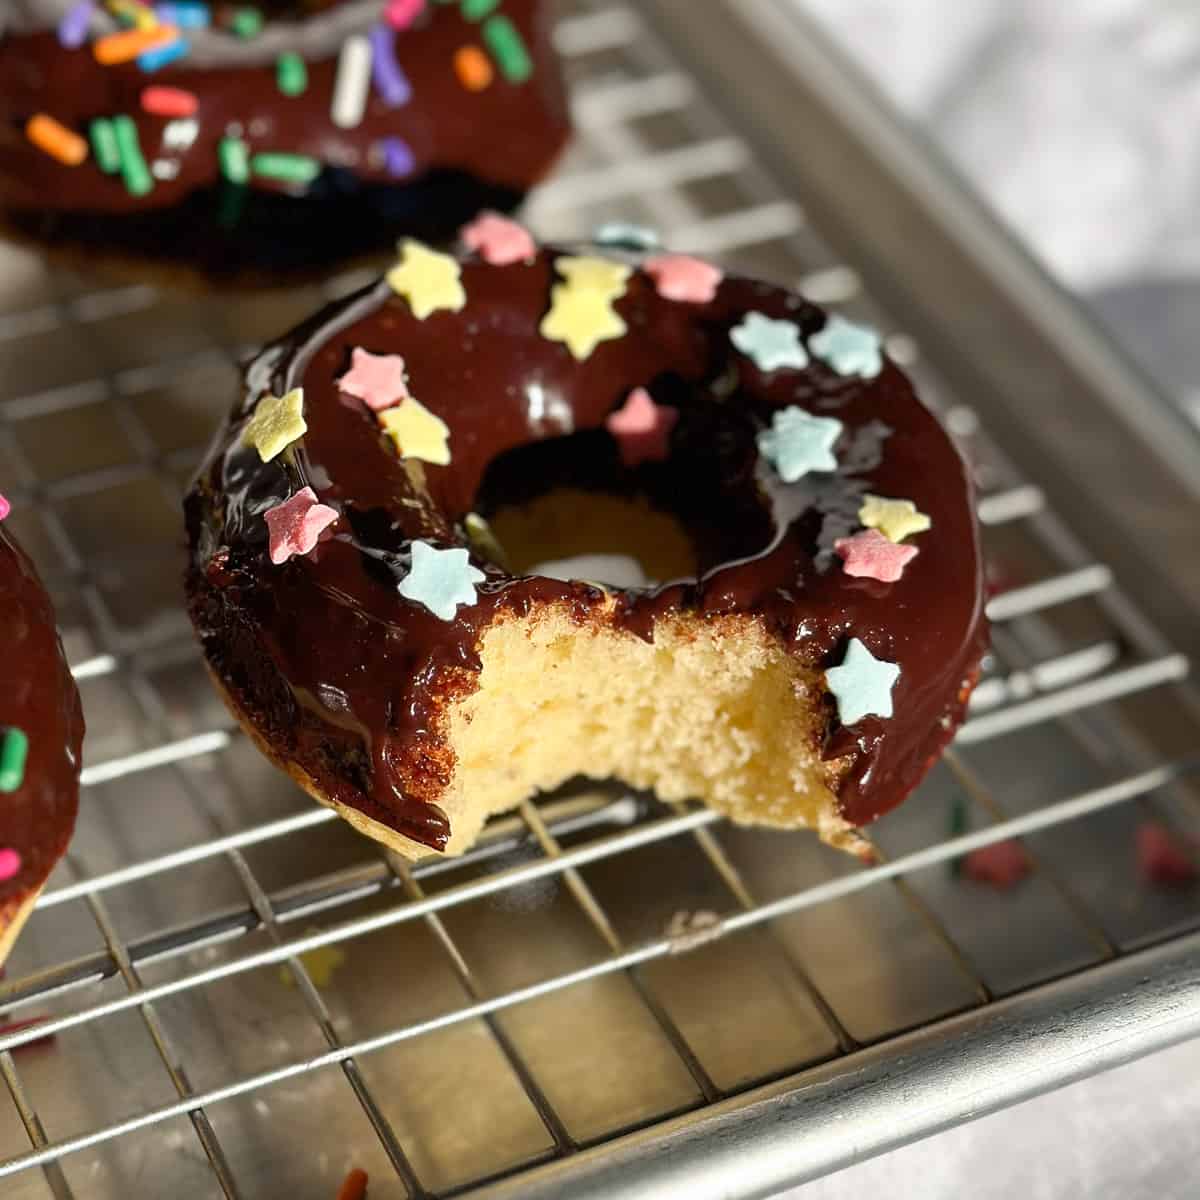 Baked chocolate glaze donuts on a wire rack, one with a bite taken out.